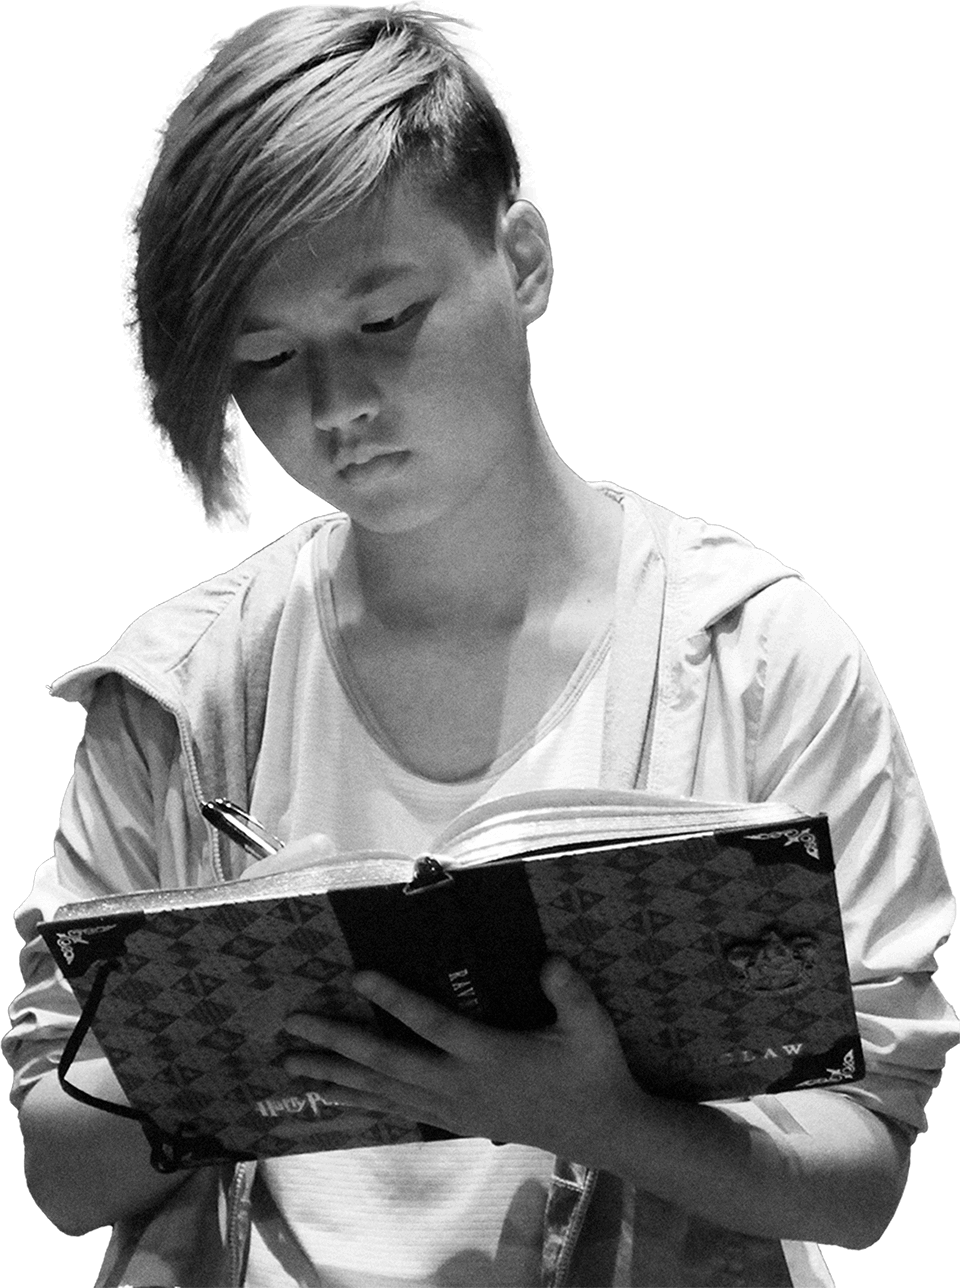 Student looking at book